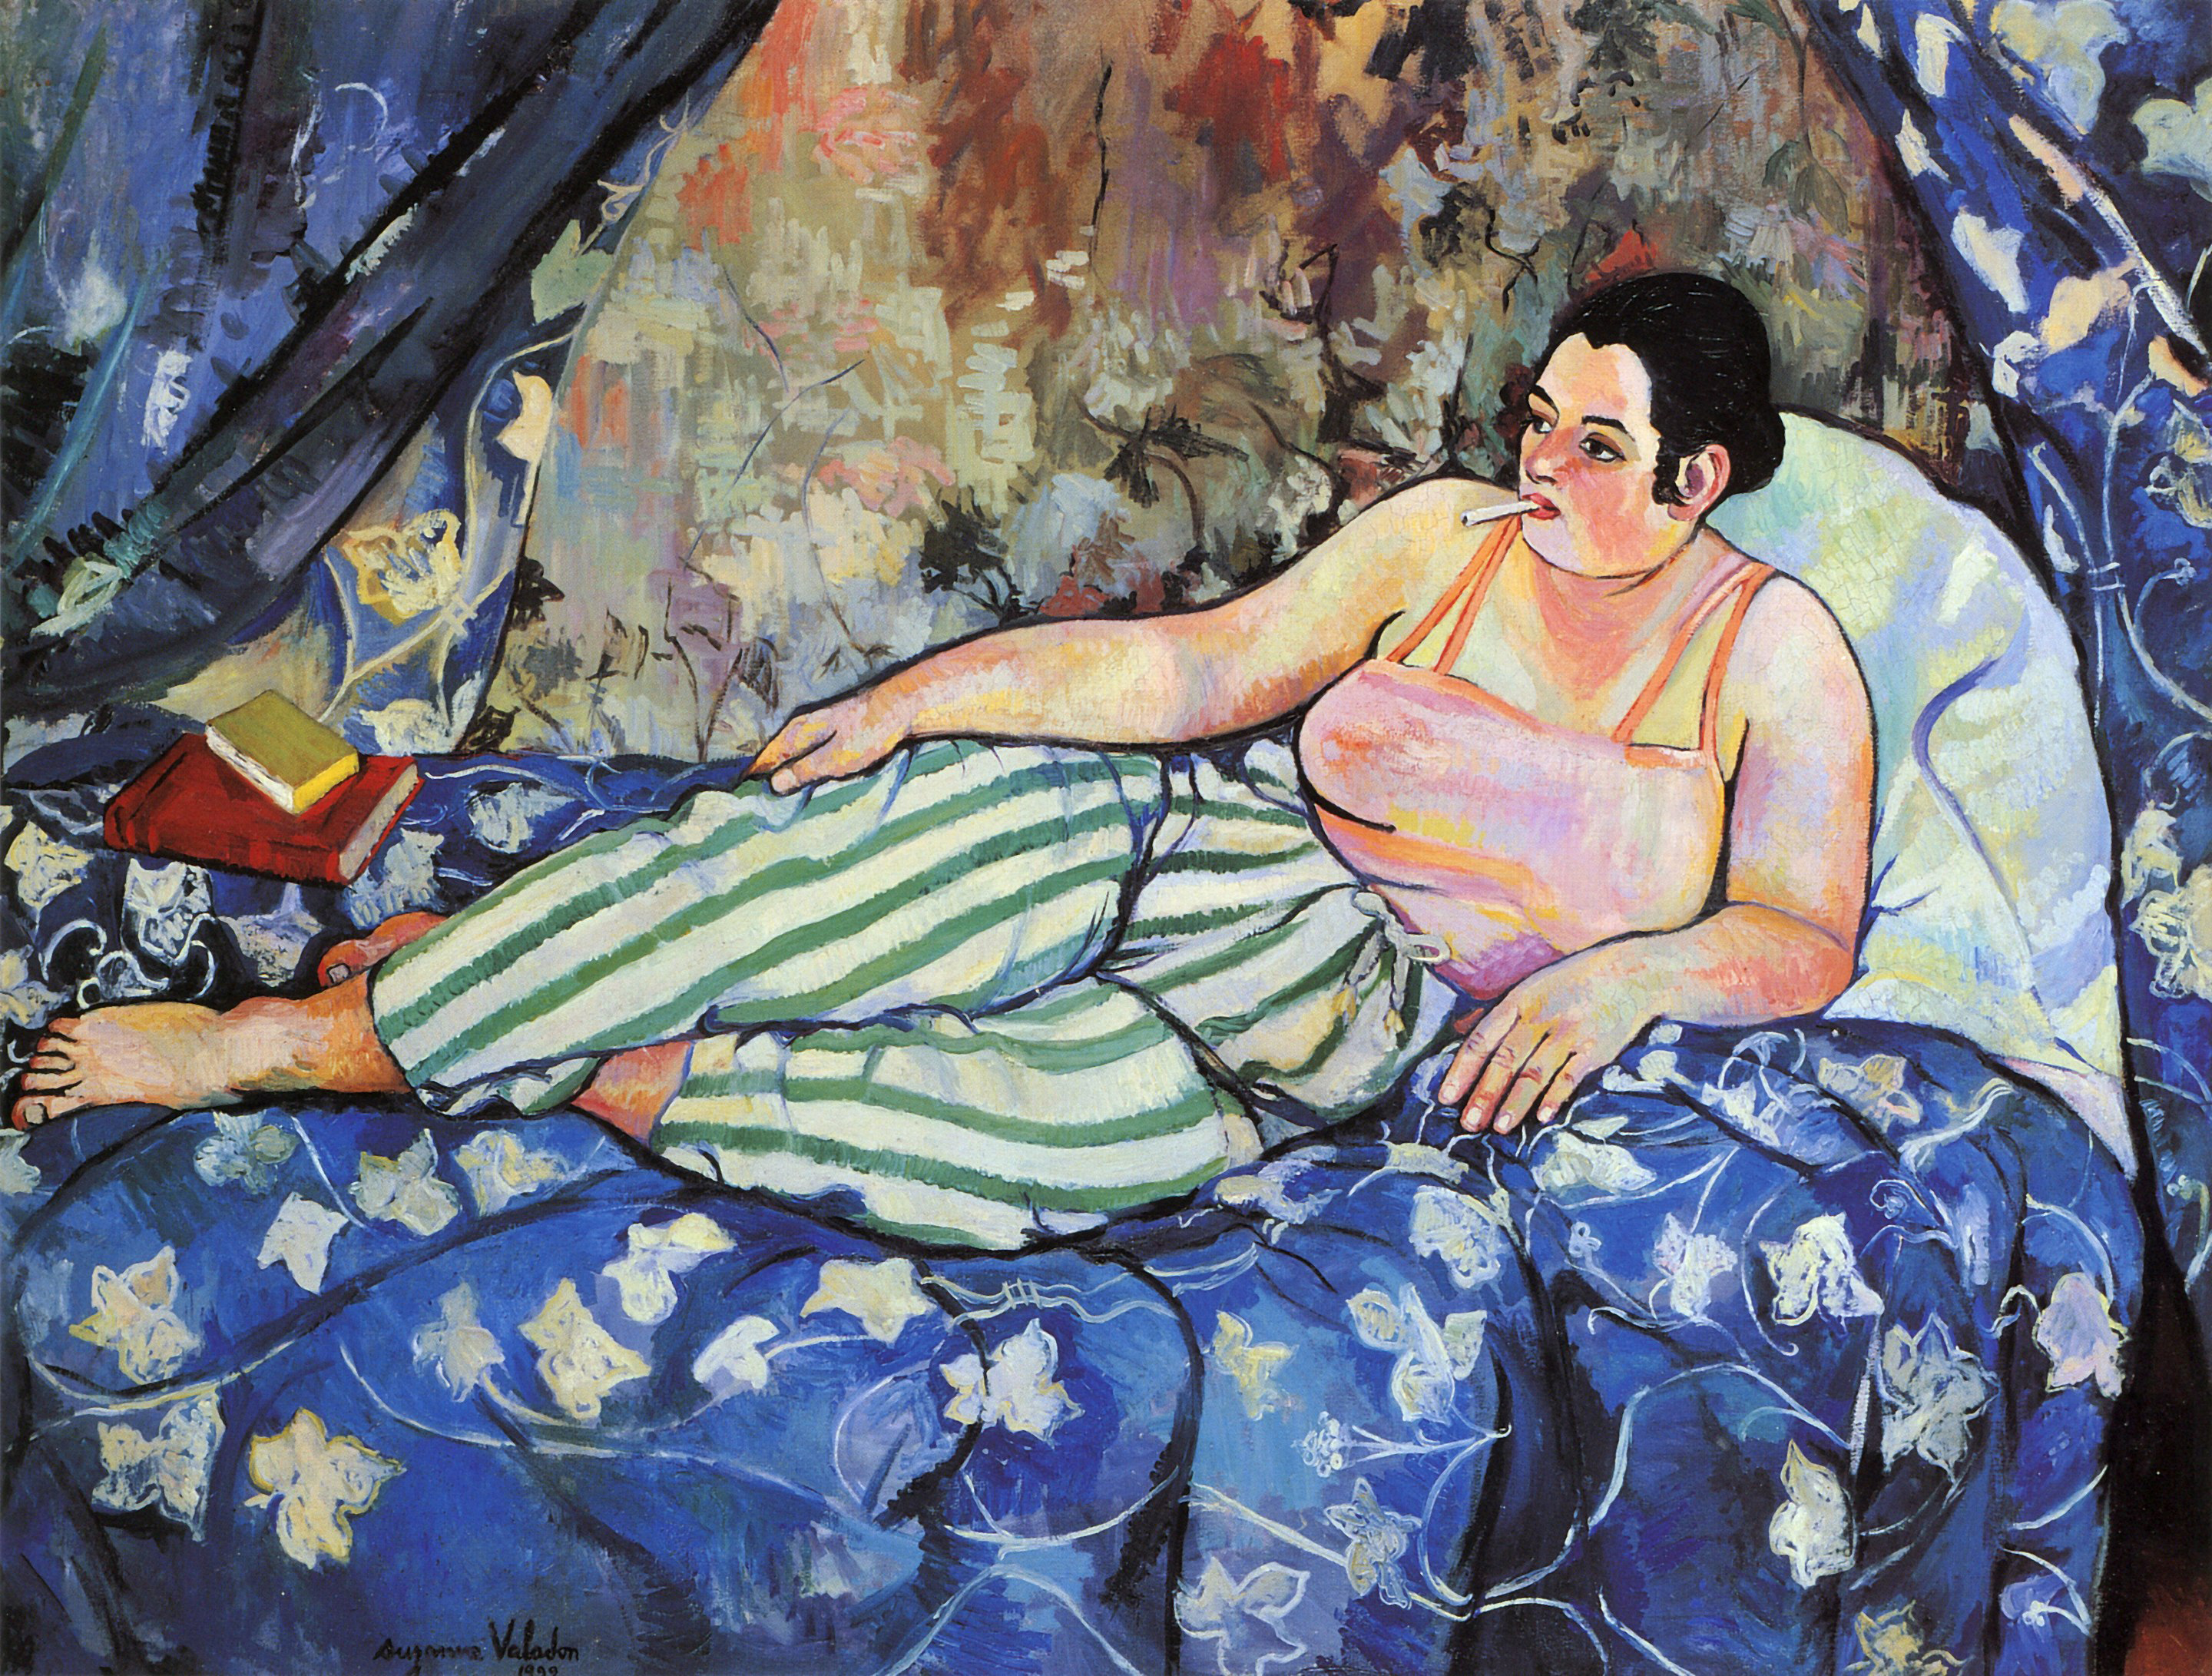 Suzanne Valadon: The Blue Room (1923).